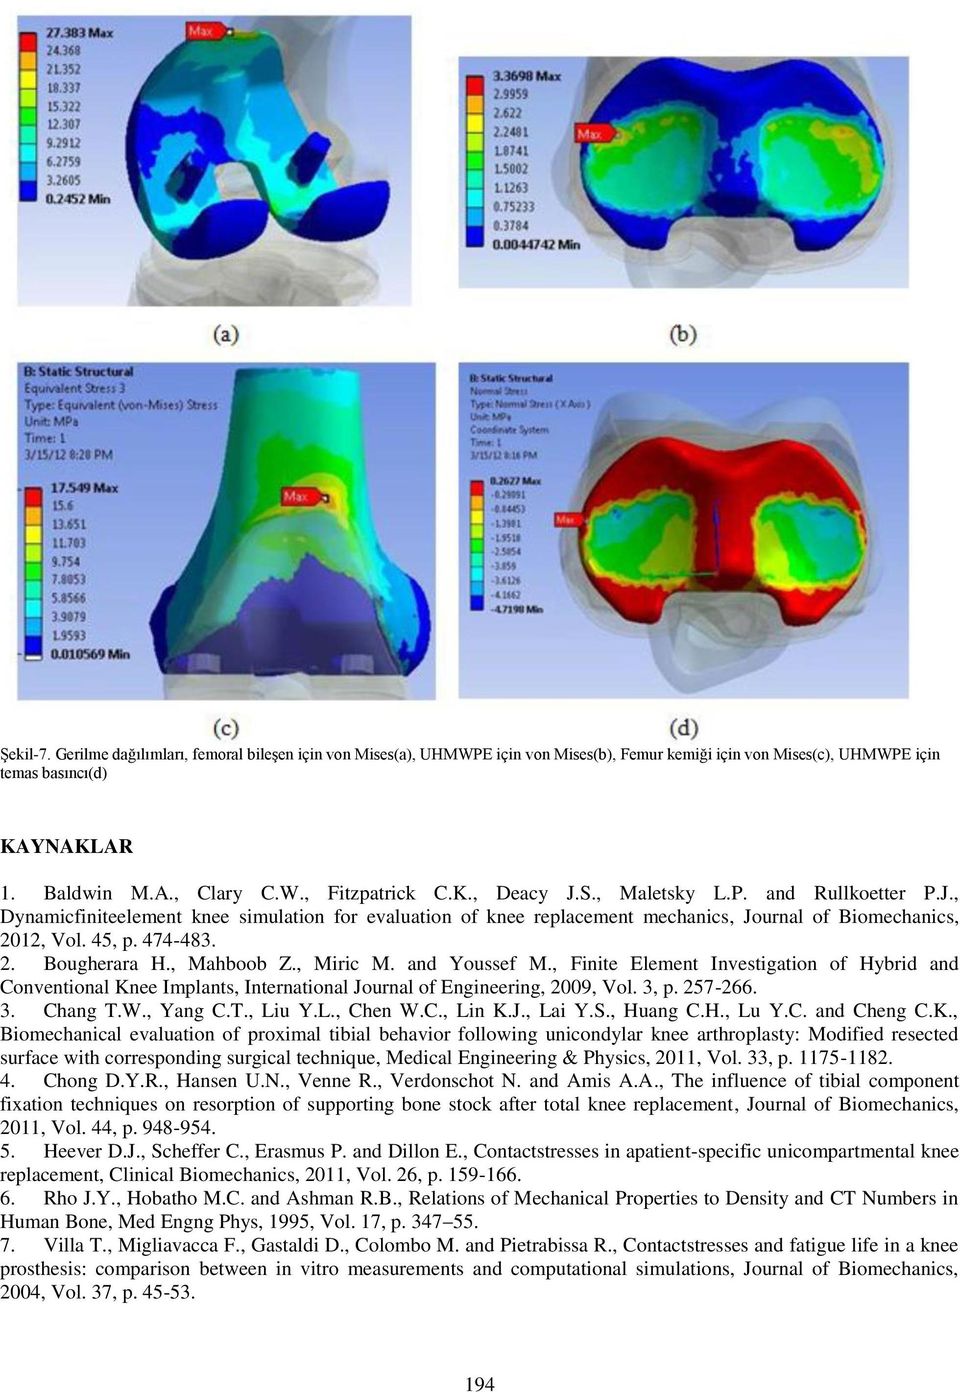 , Mahboob Z., Miric M. and Youssef M., Finite Element Investigation of Hybrid and Conventional Knee Implants, International Journal of Engineering, 2009, Vol. 3, p. 257-266. 3. Chang T.W., Yang C.T., Liu Y.